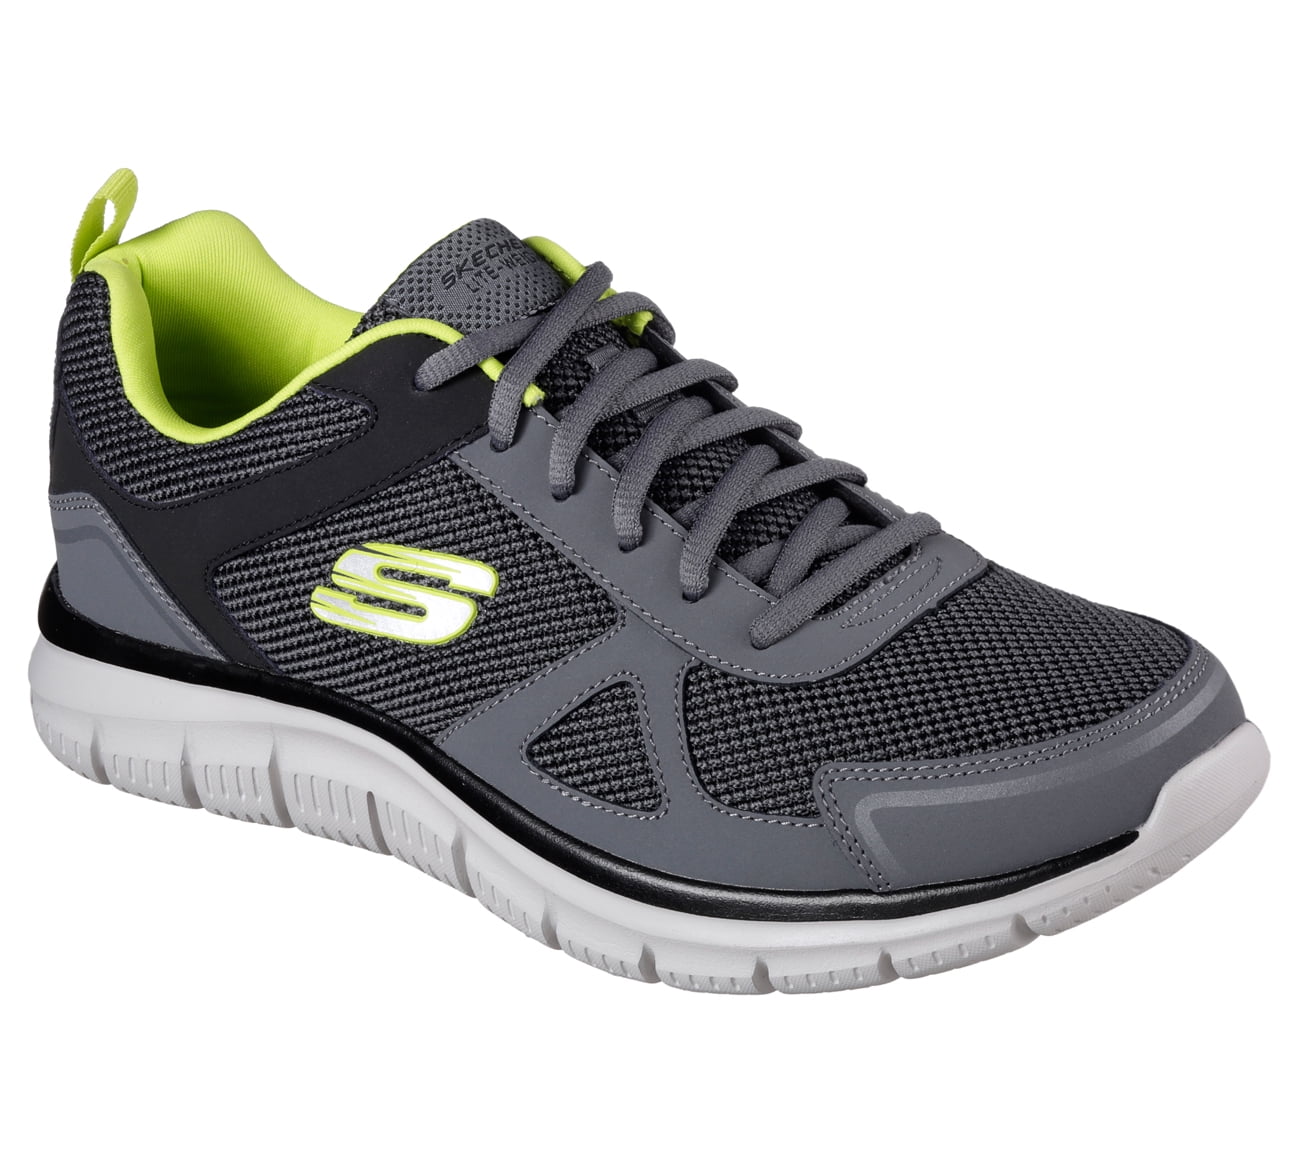  Are skechers good workout shoes for Beginner